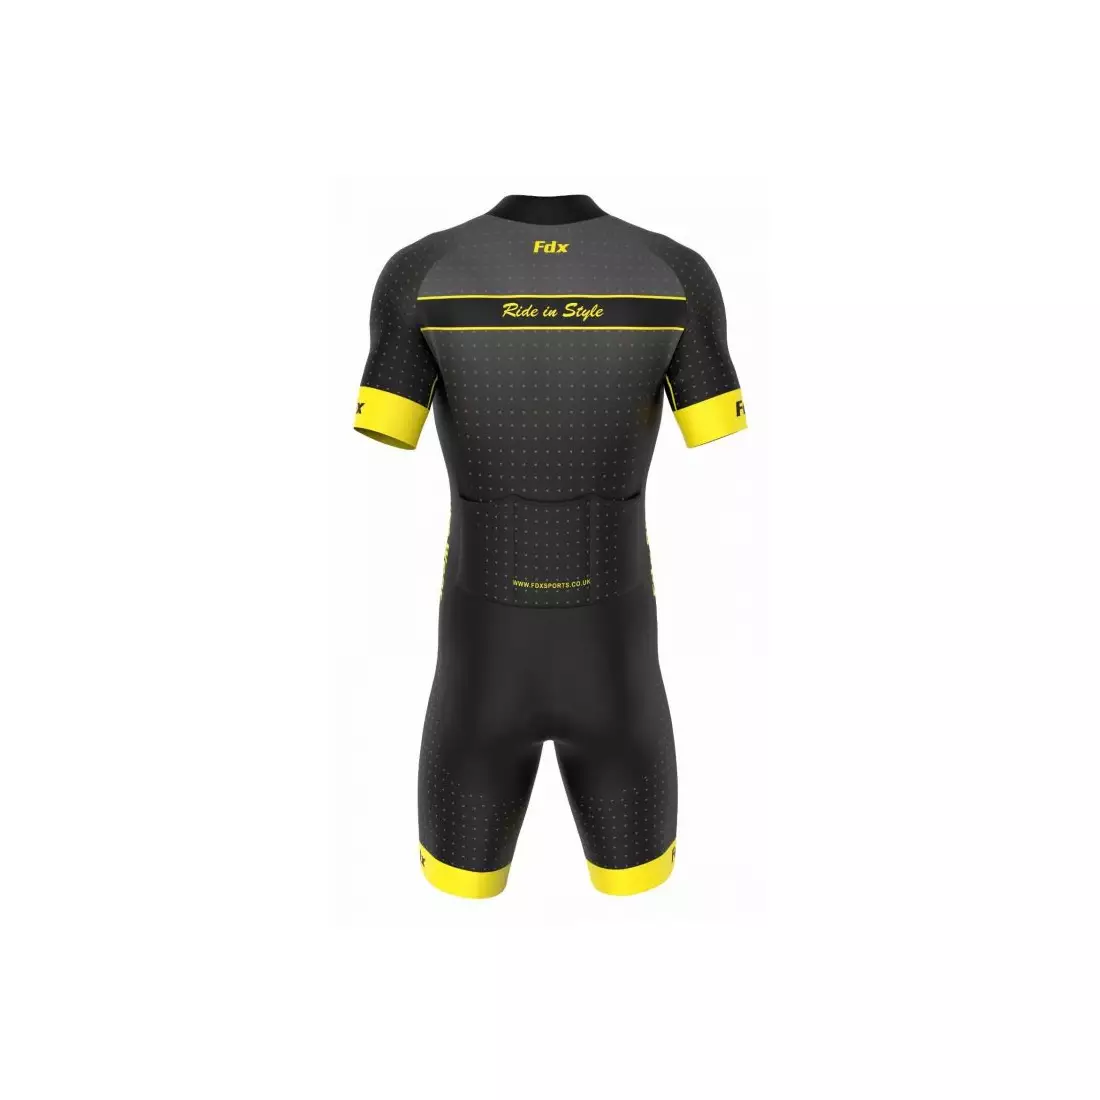 FDX 1290 one-piece cycling suit black and yellow